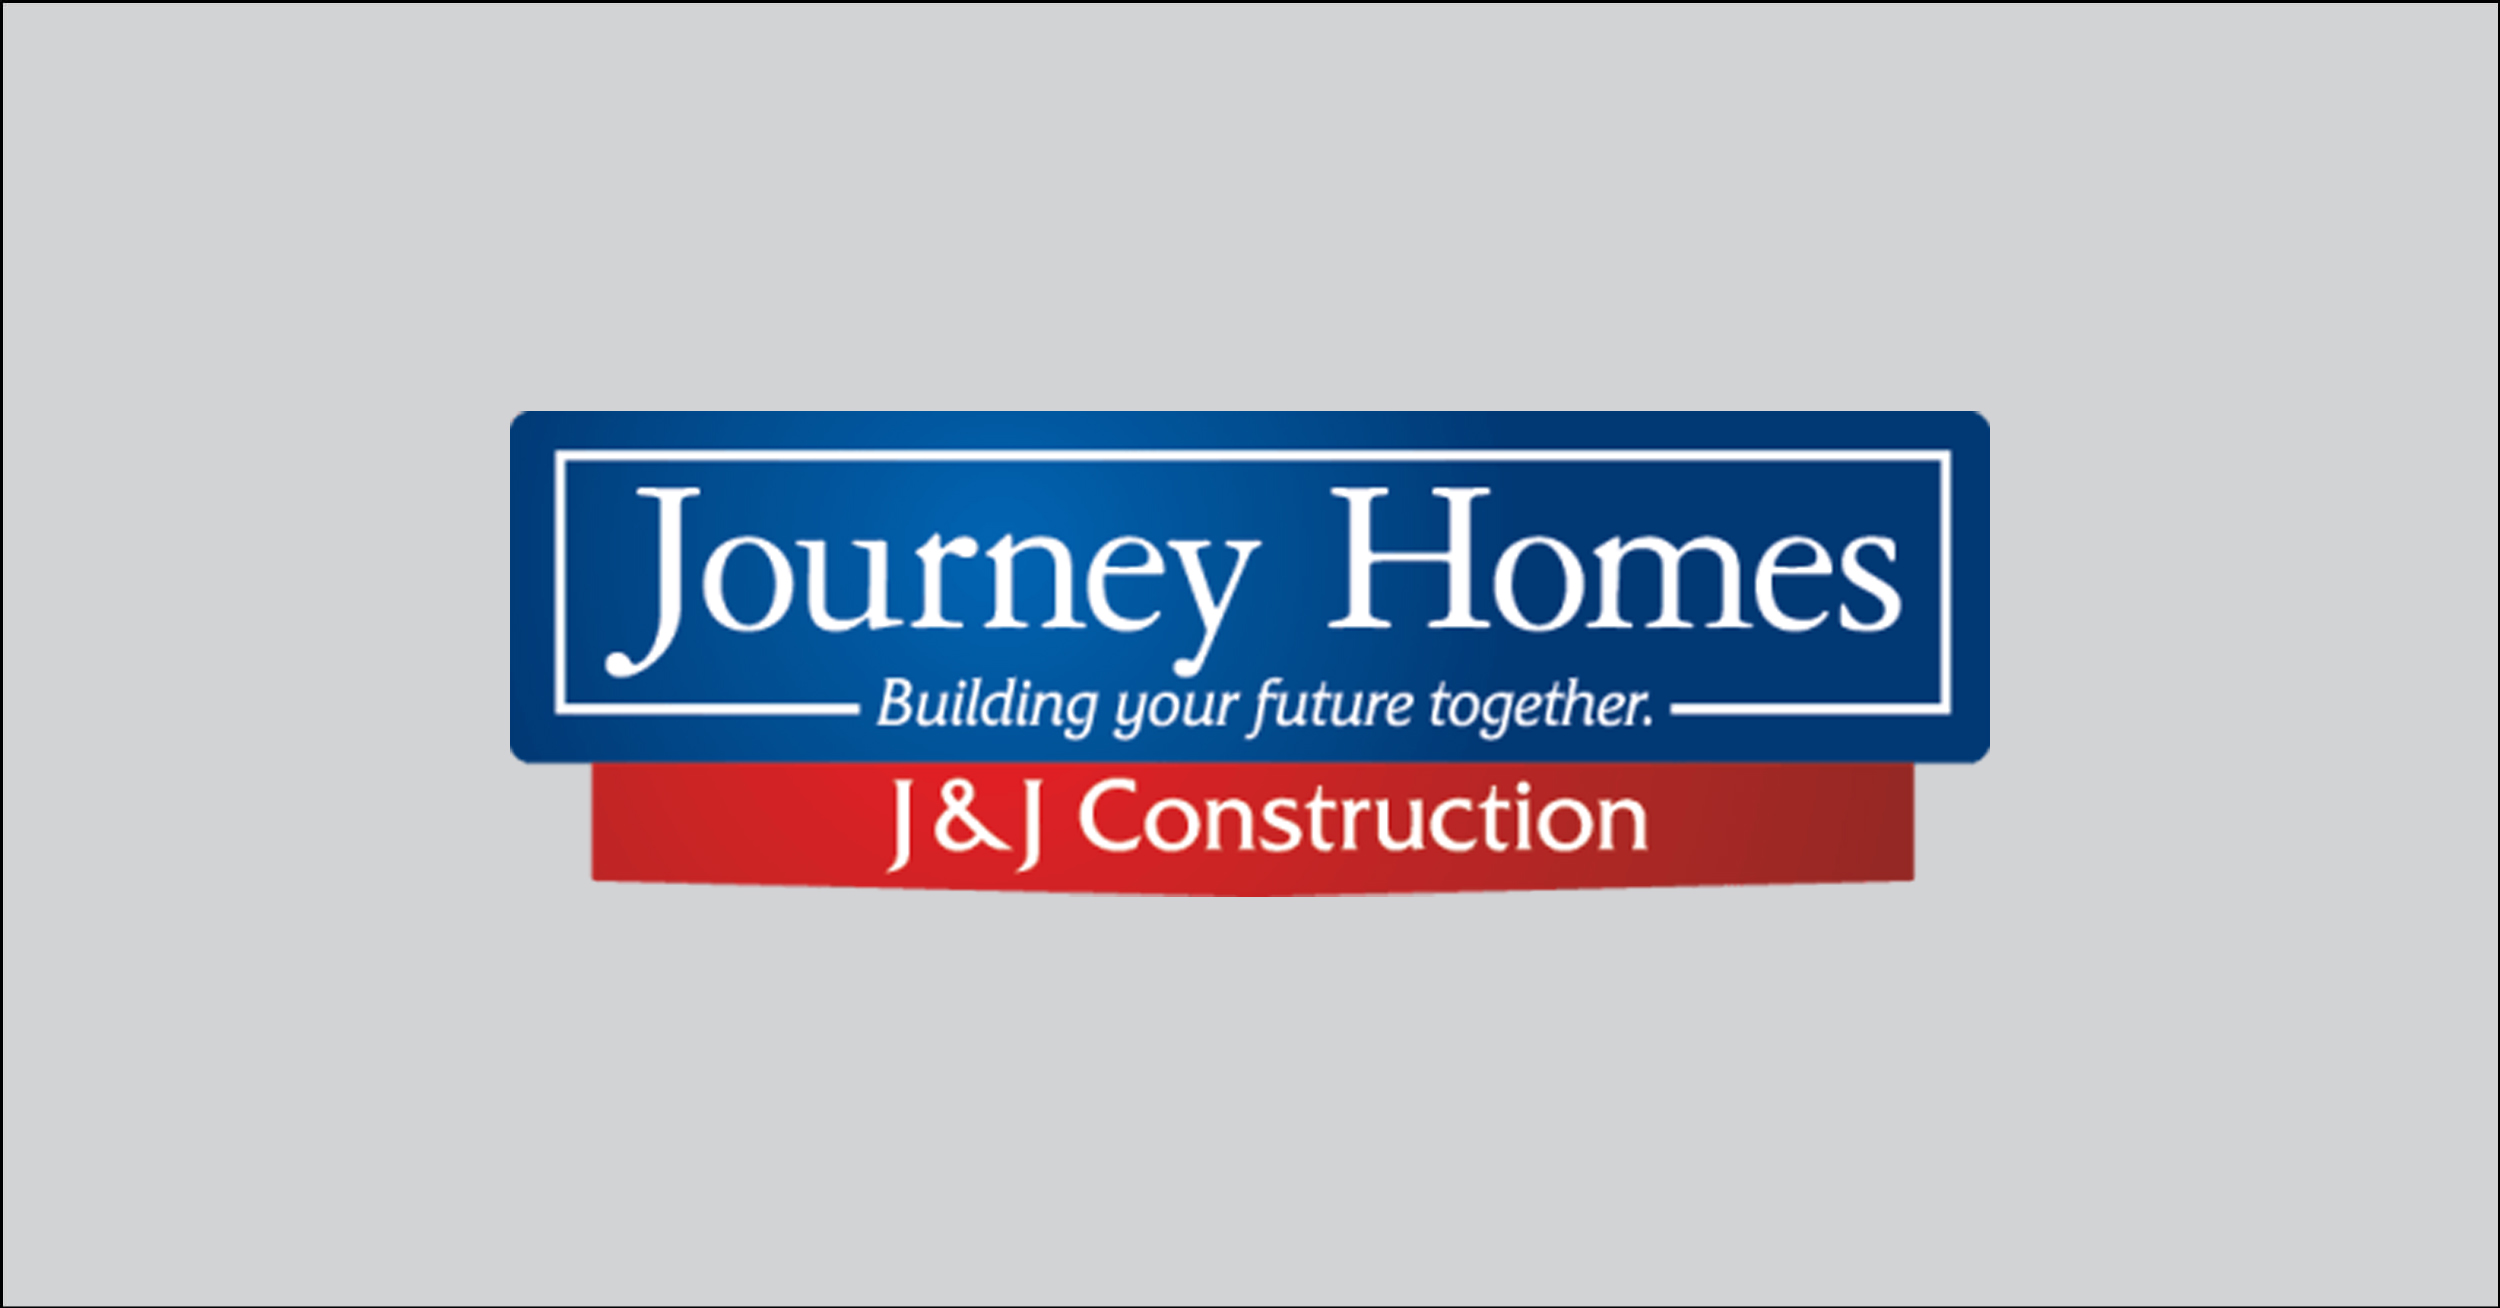 Search or find new homes and communities by Journey Homes in Colorado